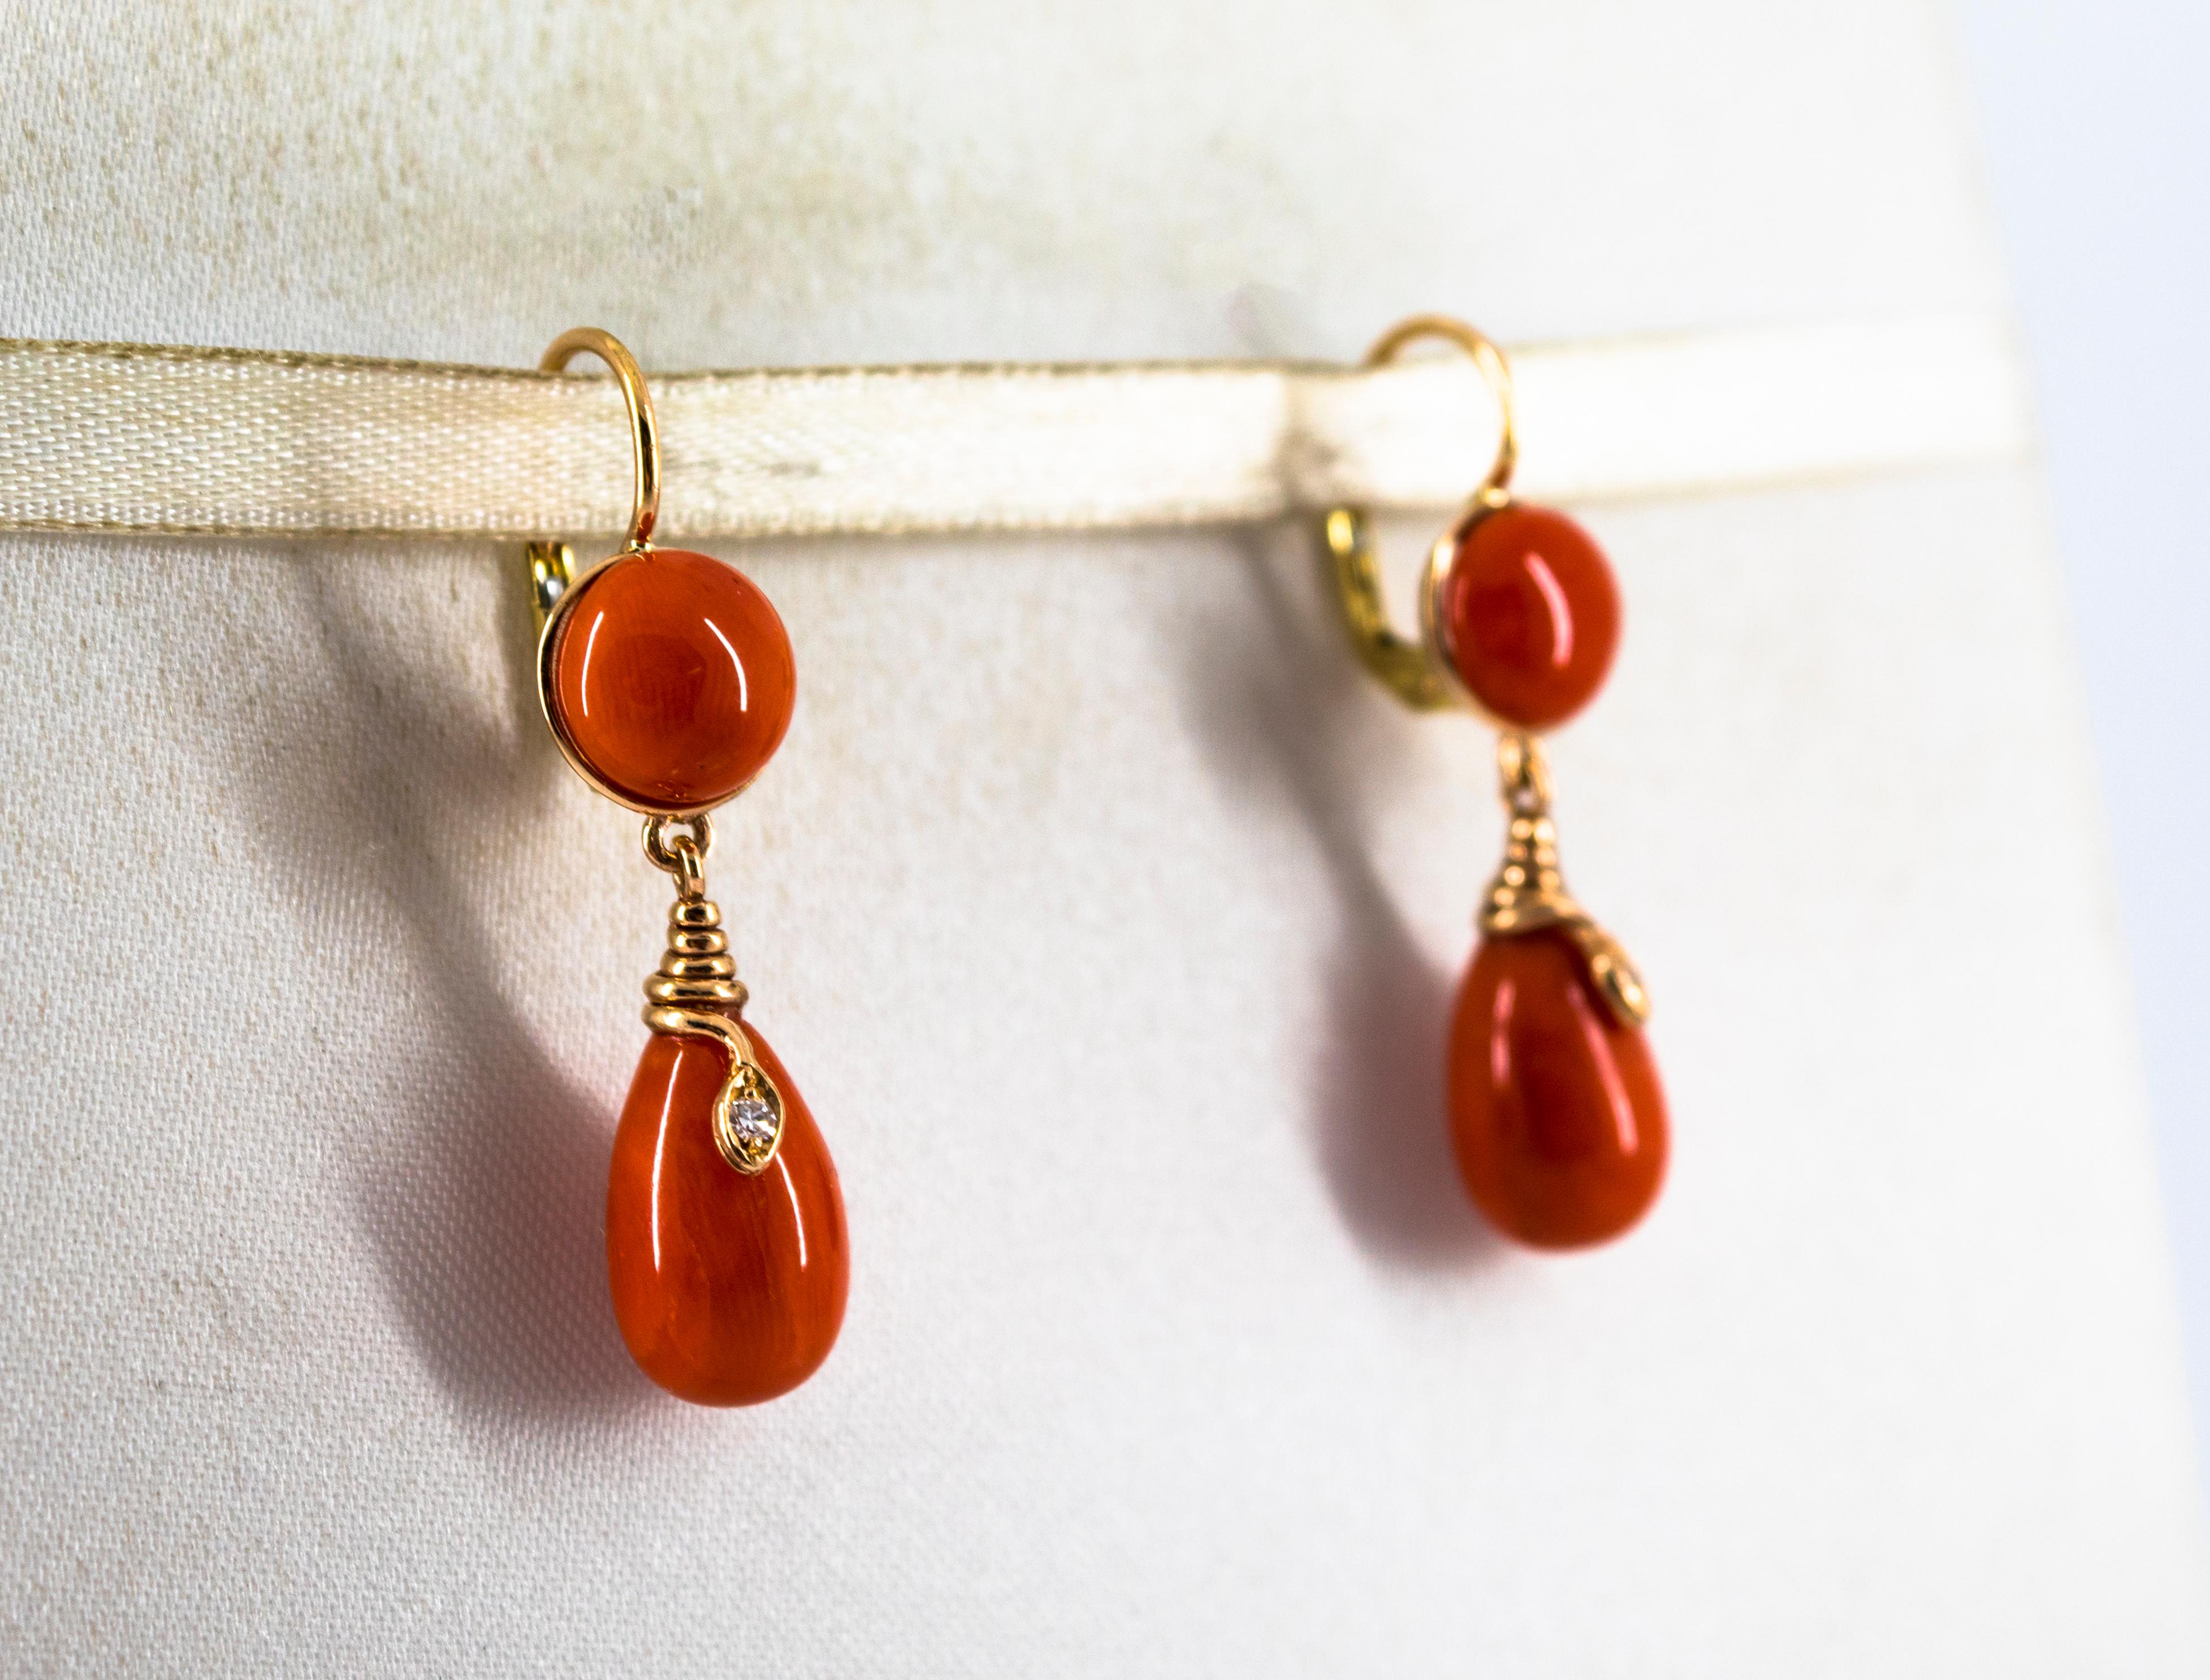 These Earrings are made of 14K Yellow Gold.
These Earrings have 0.04 Carats of White Diamonds.
These Earrings have Red Mediterranean (Sardinia, Italy) Coral.
All our Earrings have pins for pierced ears but we can change the closure and make any of